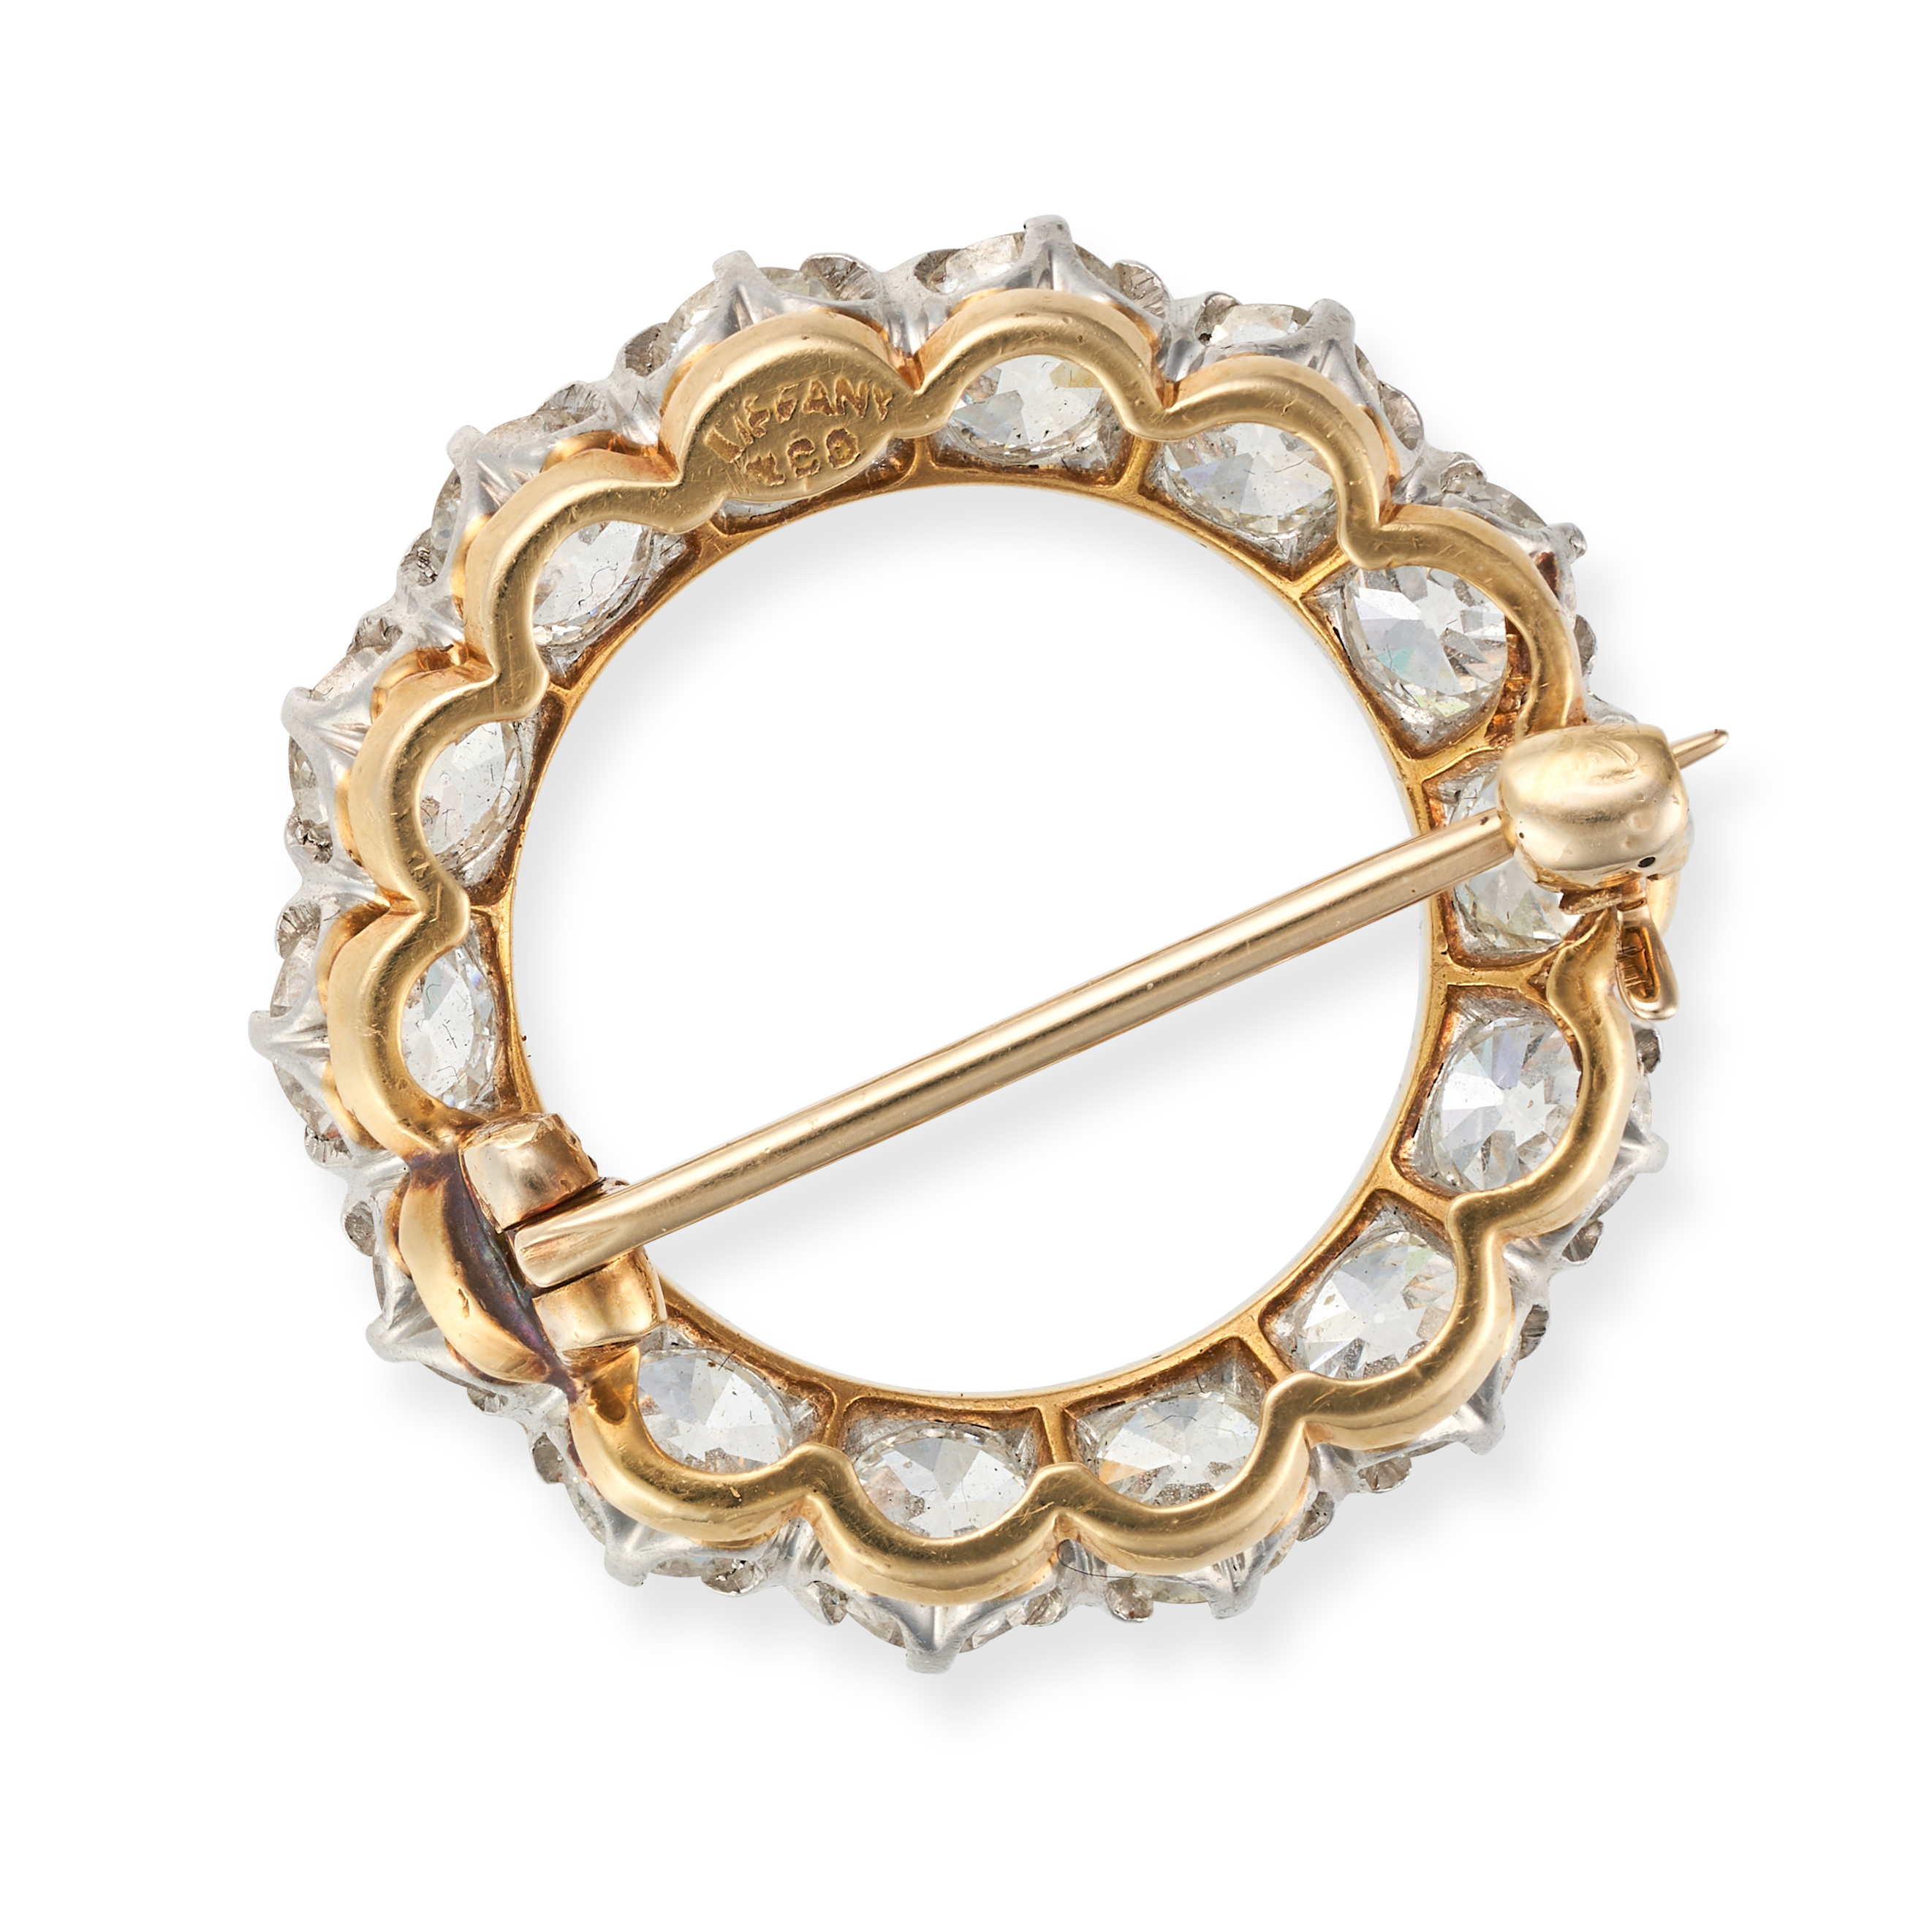 TIFFANY & CO., A DIAMOND CIRCLE BROOCH designed as an open circle set with old cut diamonds, the ... - Image 2 of 2